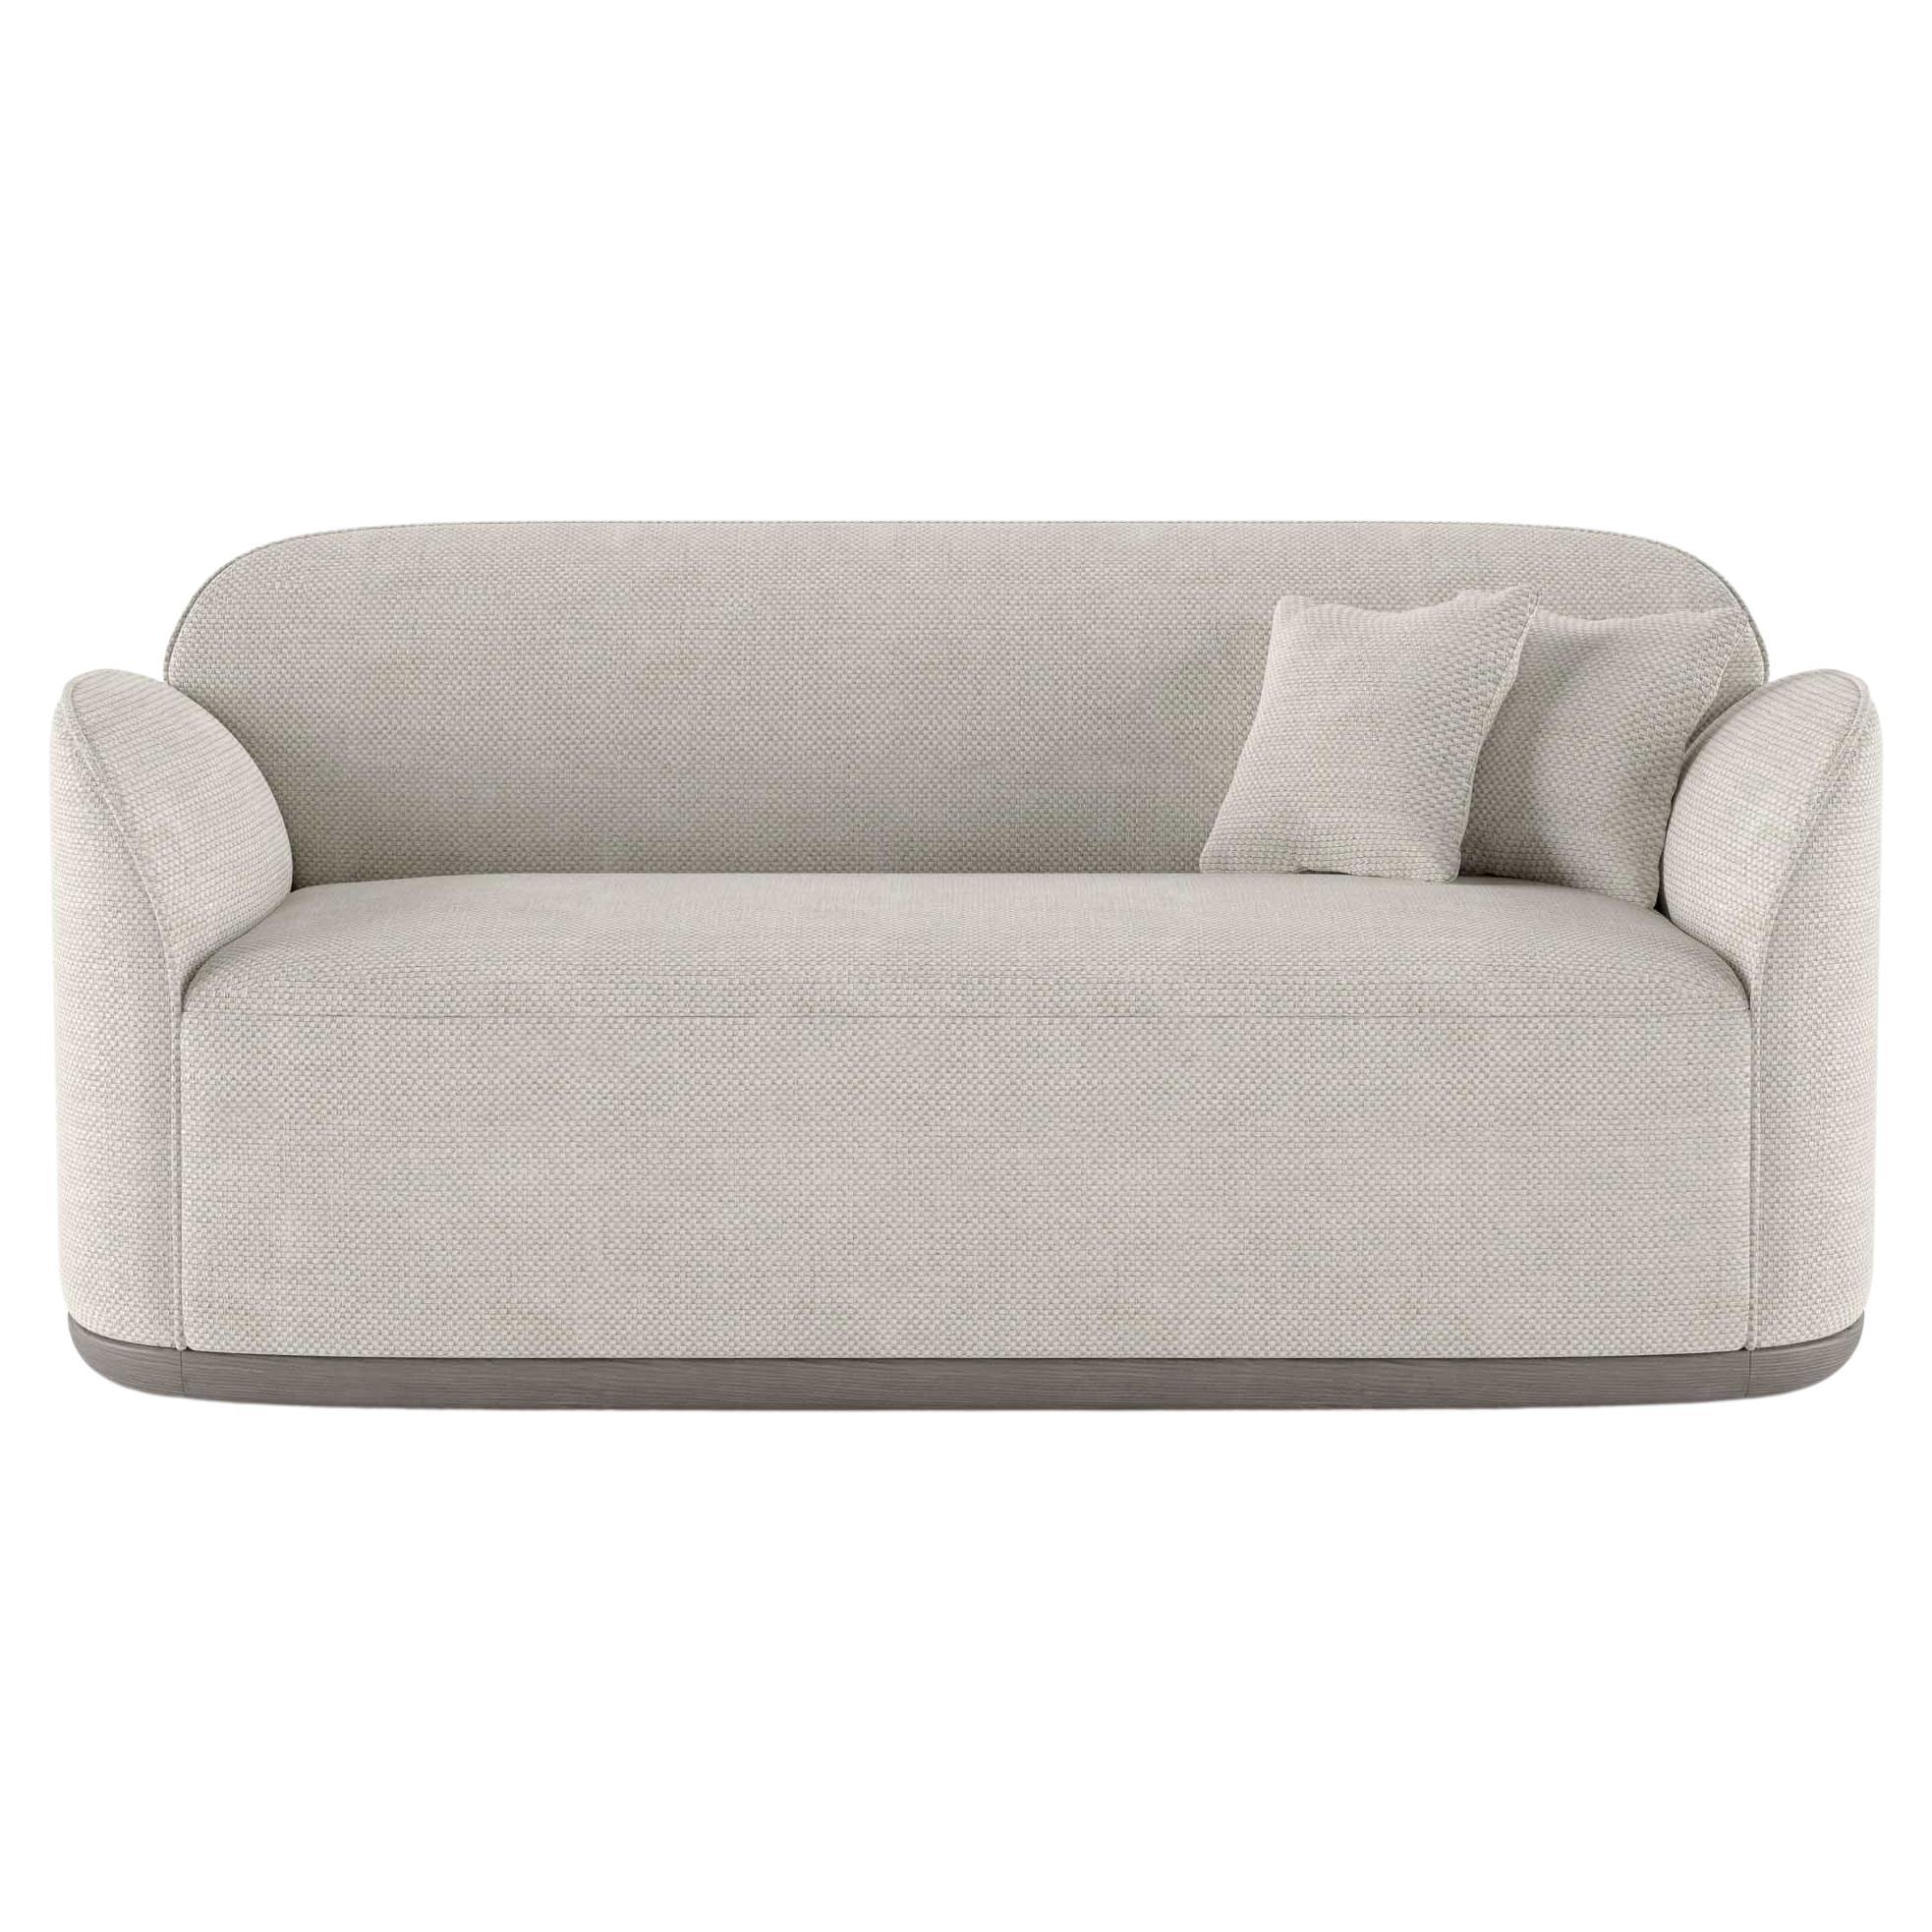 Contemporary Loveseat 'Unio' by Poiat, Fabric Fox 02 by Larsen